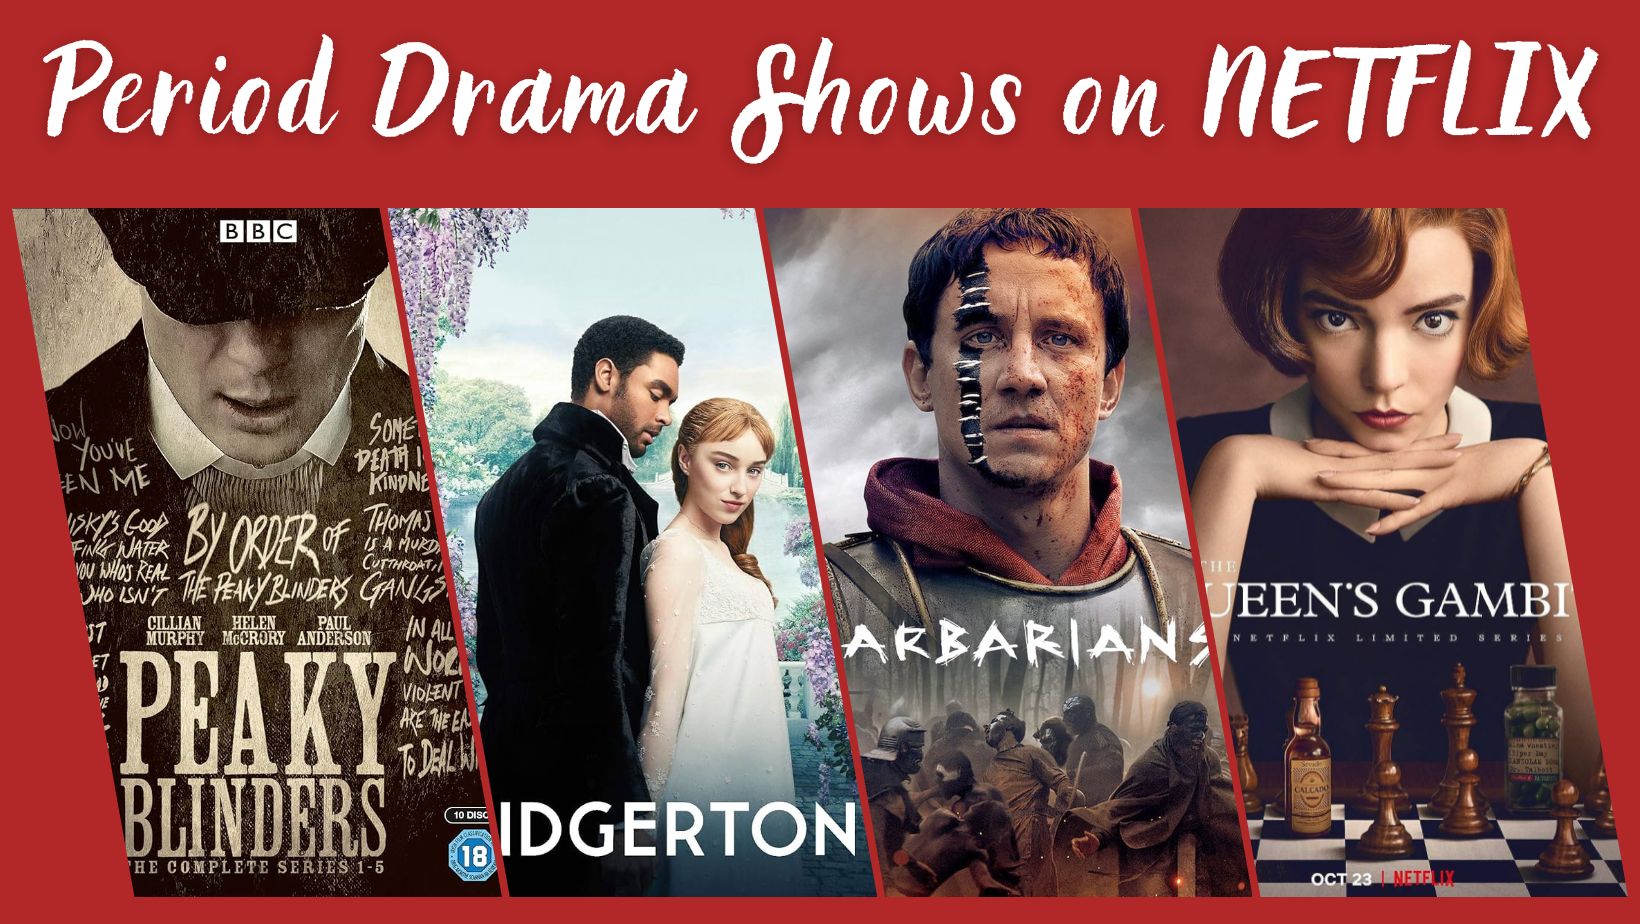 20 Historical Period Drama Shows on Netflix Streaming Now